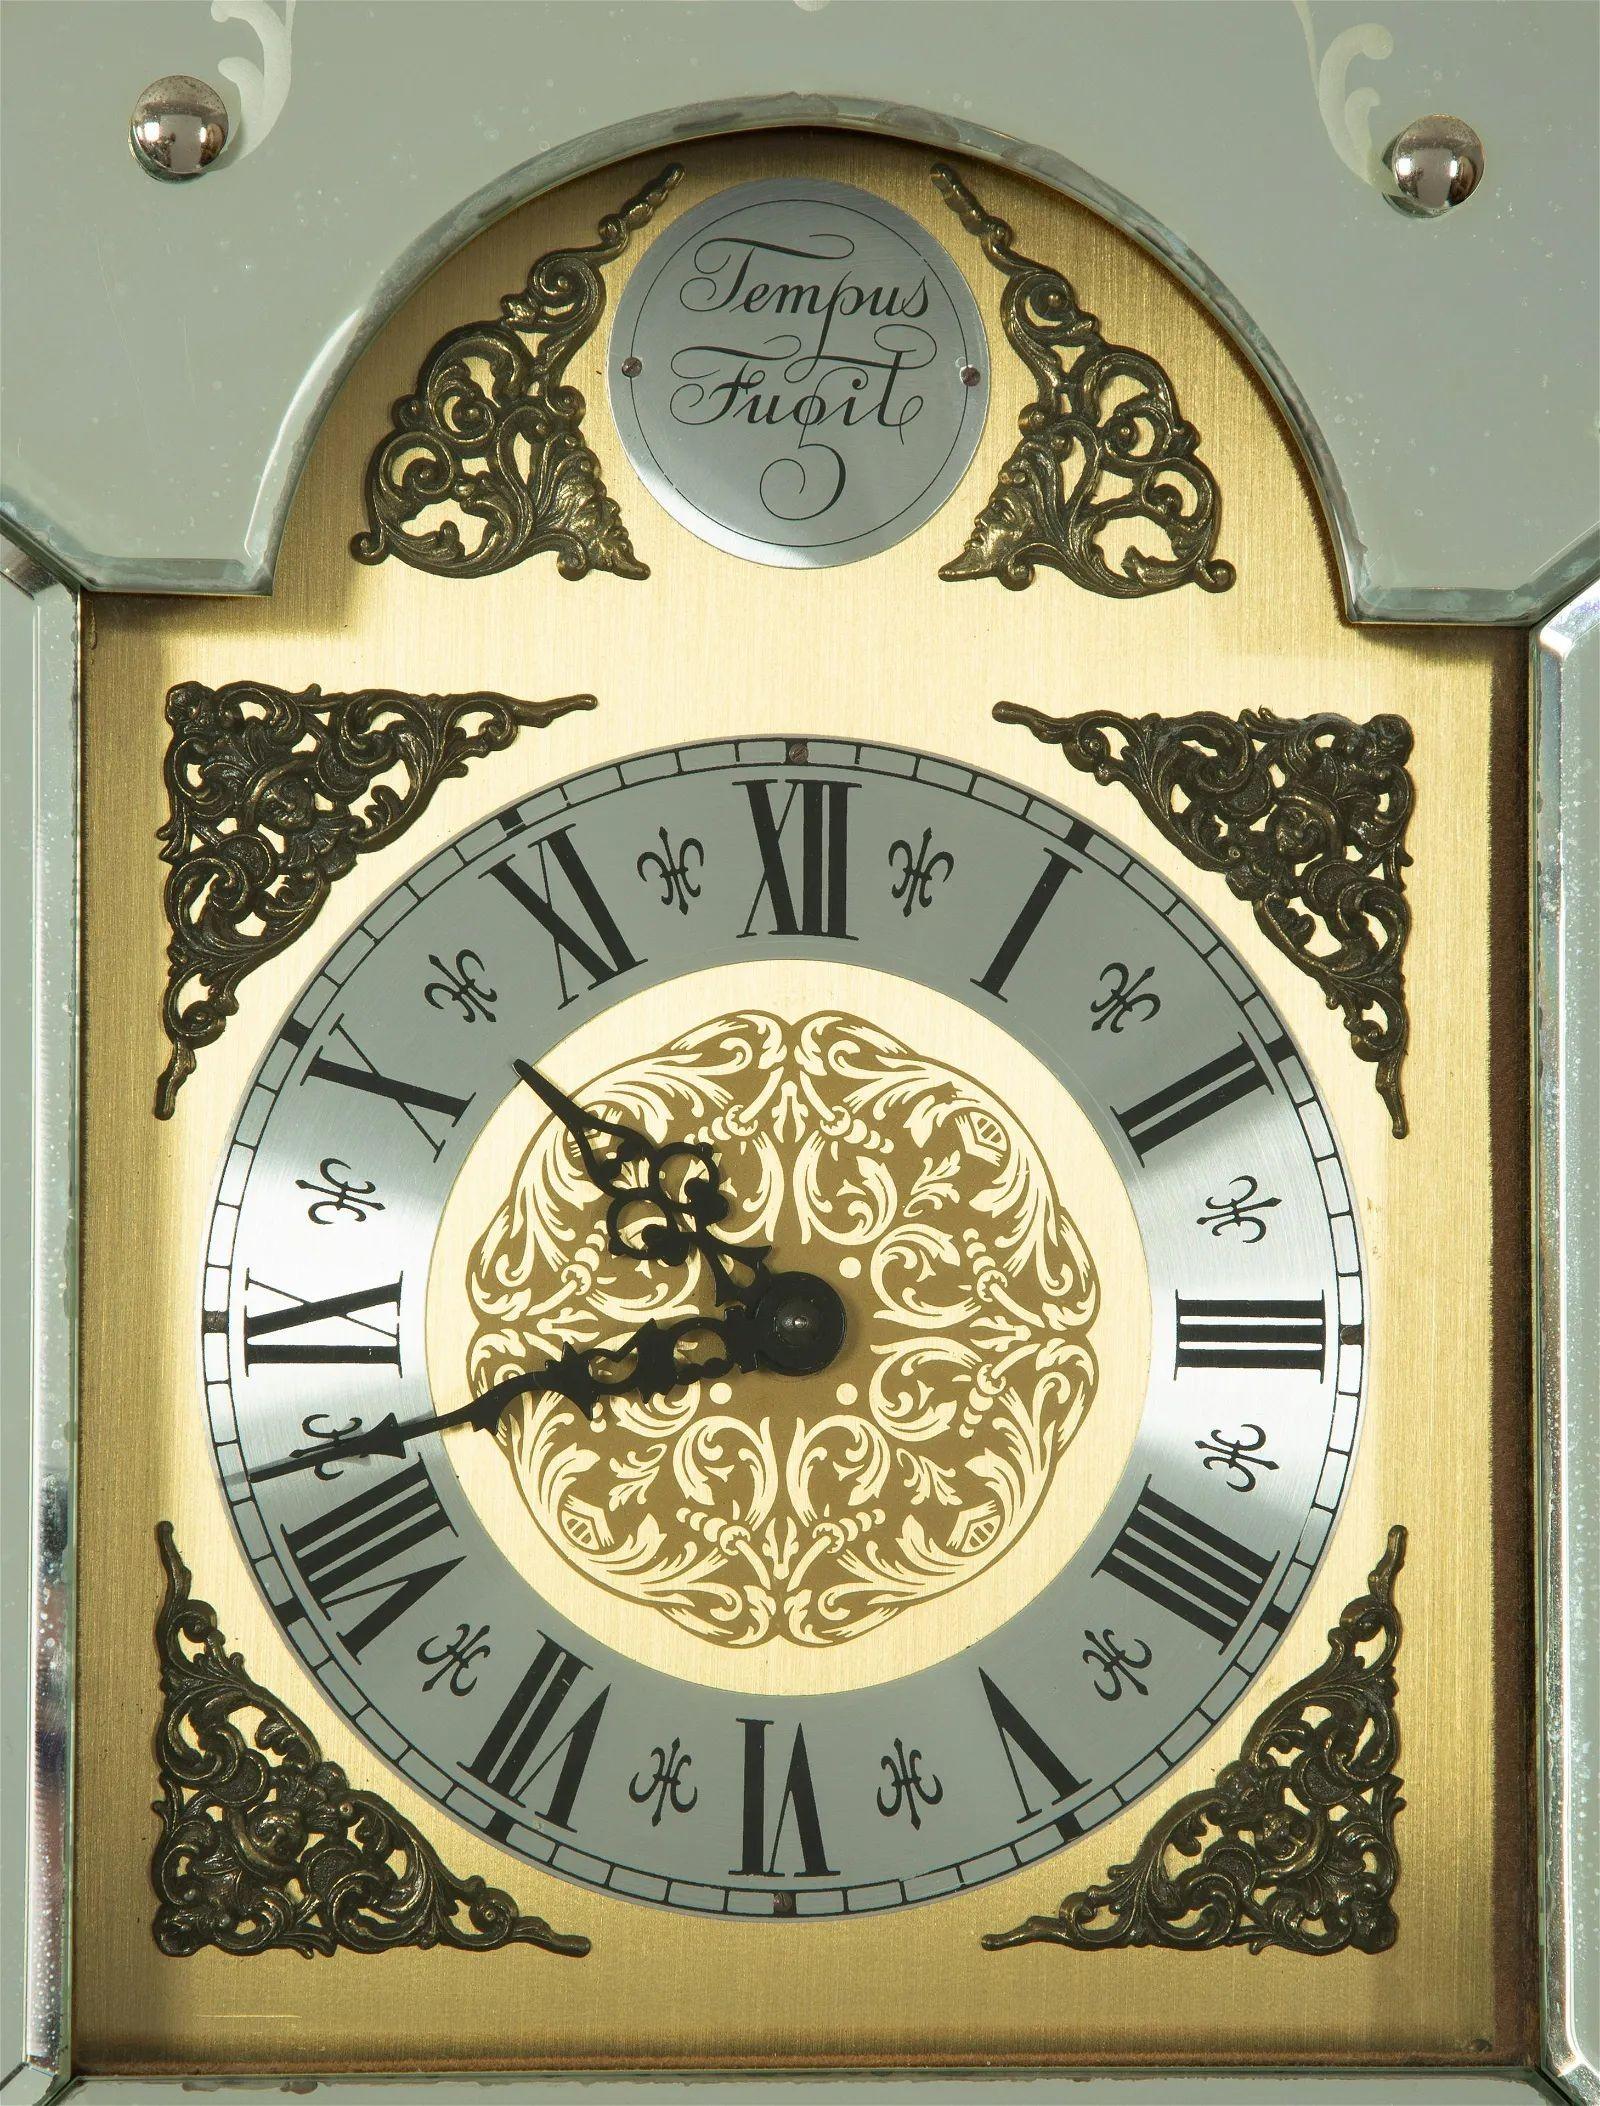 Hollywood Regency style Beveled Etched glass tall case grandfather clock. This highly decorative Hollywood Regency style work of art has a Giltwood case with all over Beveled Etched Venetian Mirror on the sides as well as the front. This Tempus